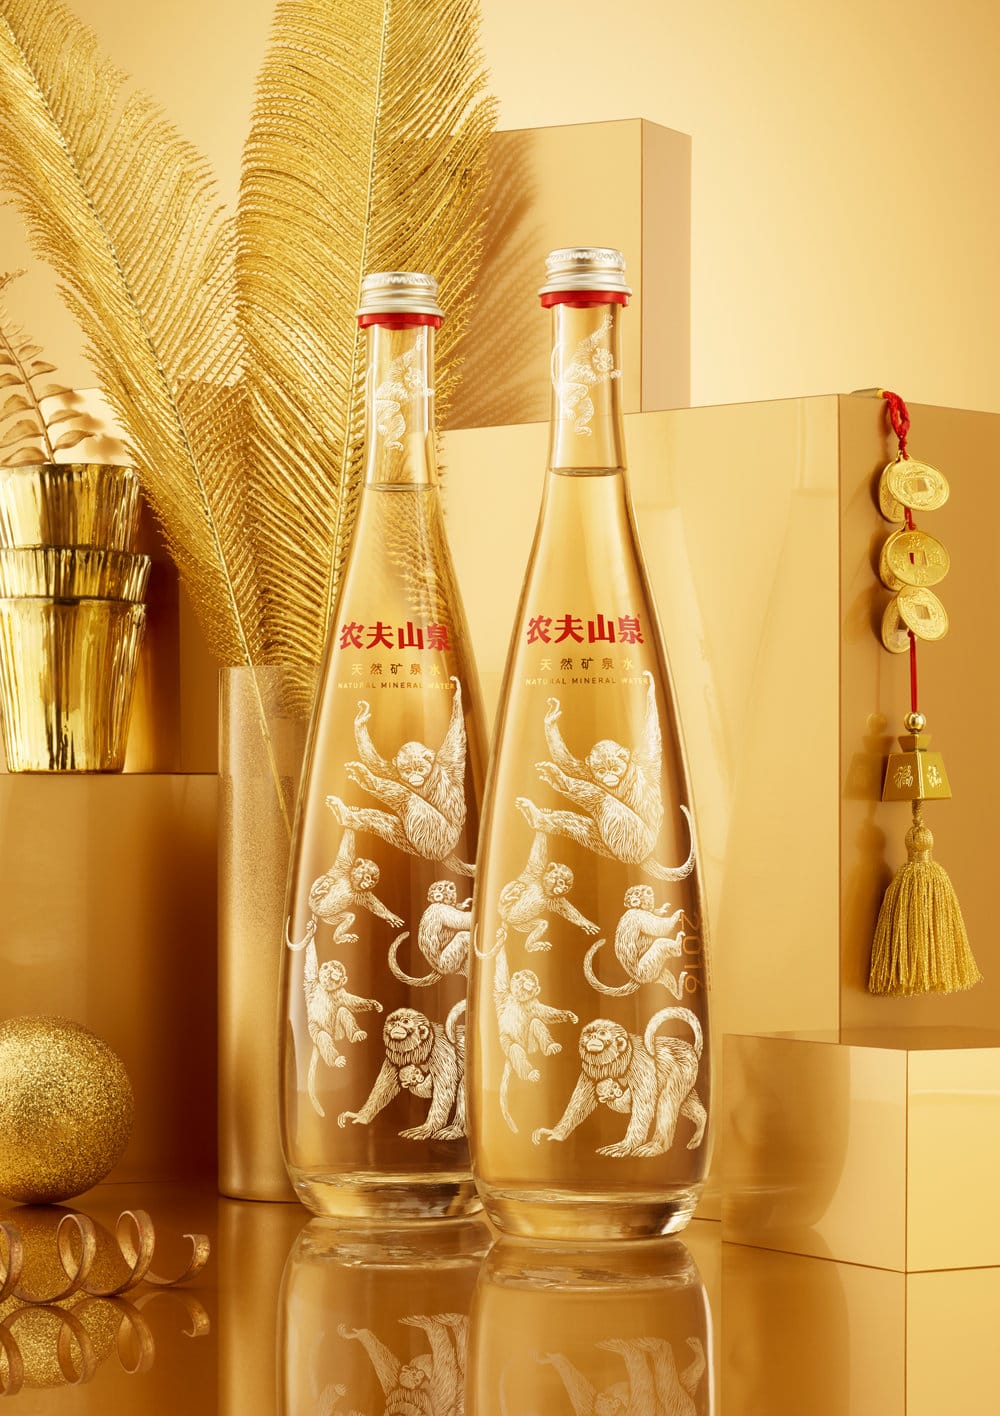 Horse – Nongfu Spring limited edition mineral water